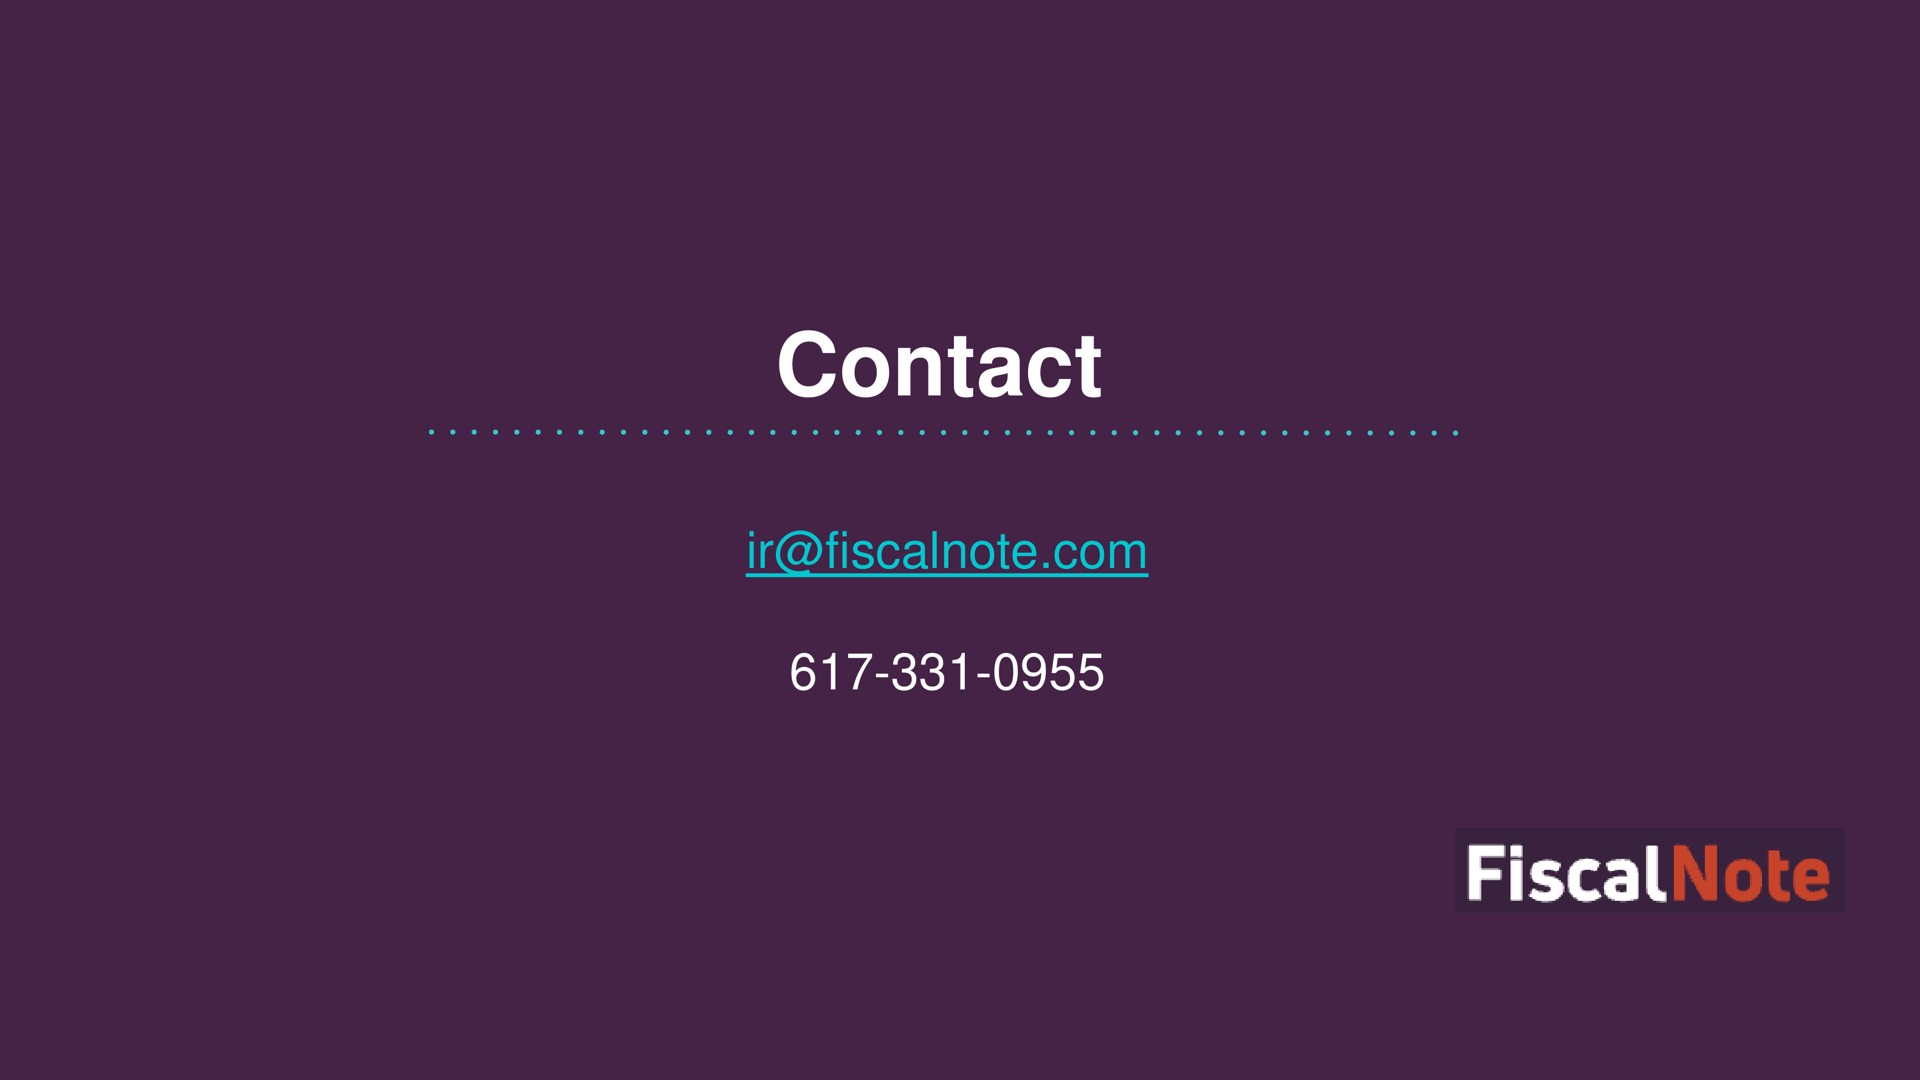 contact fiscal | FiscalNote